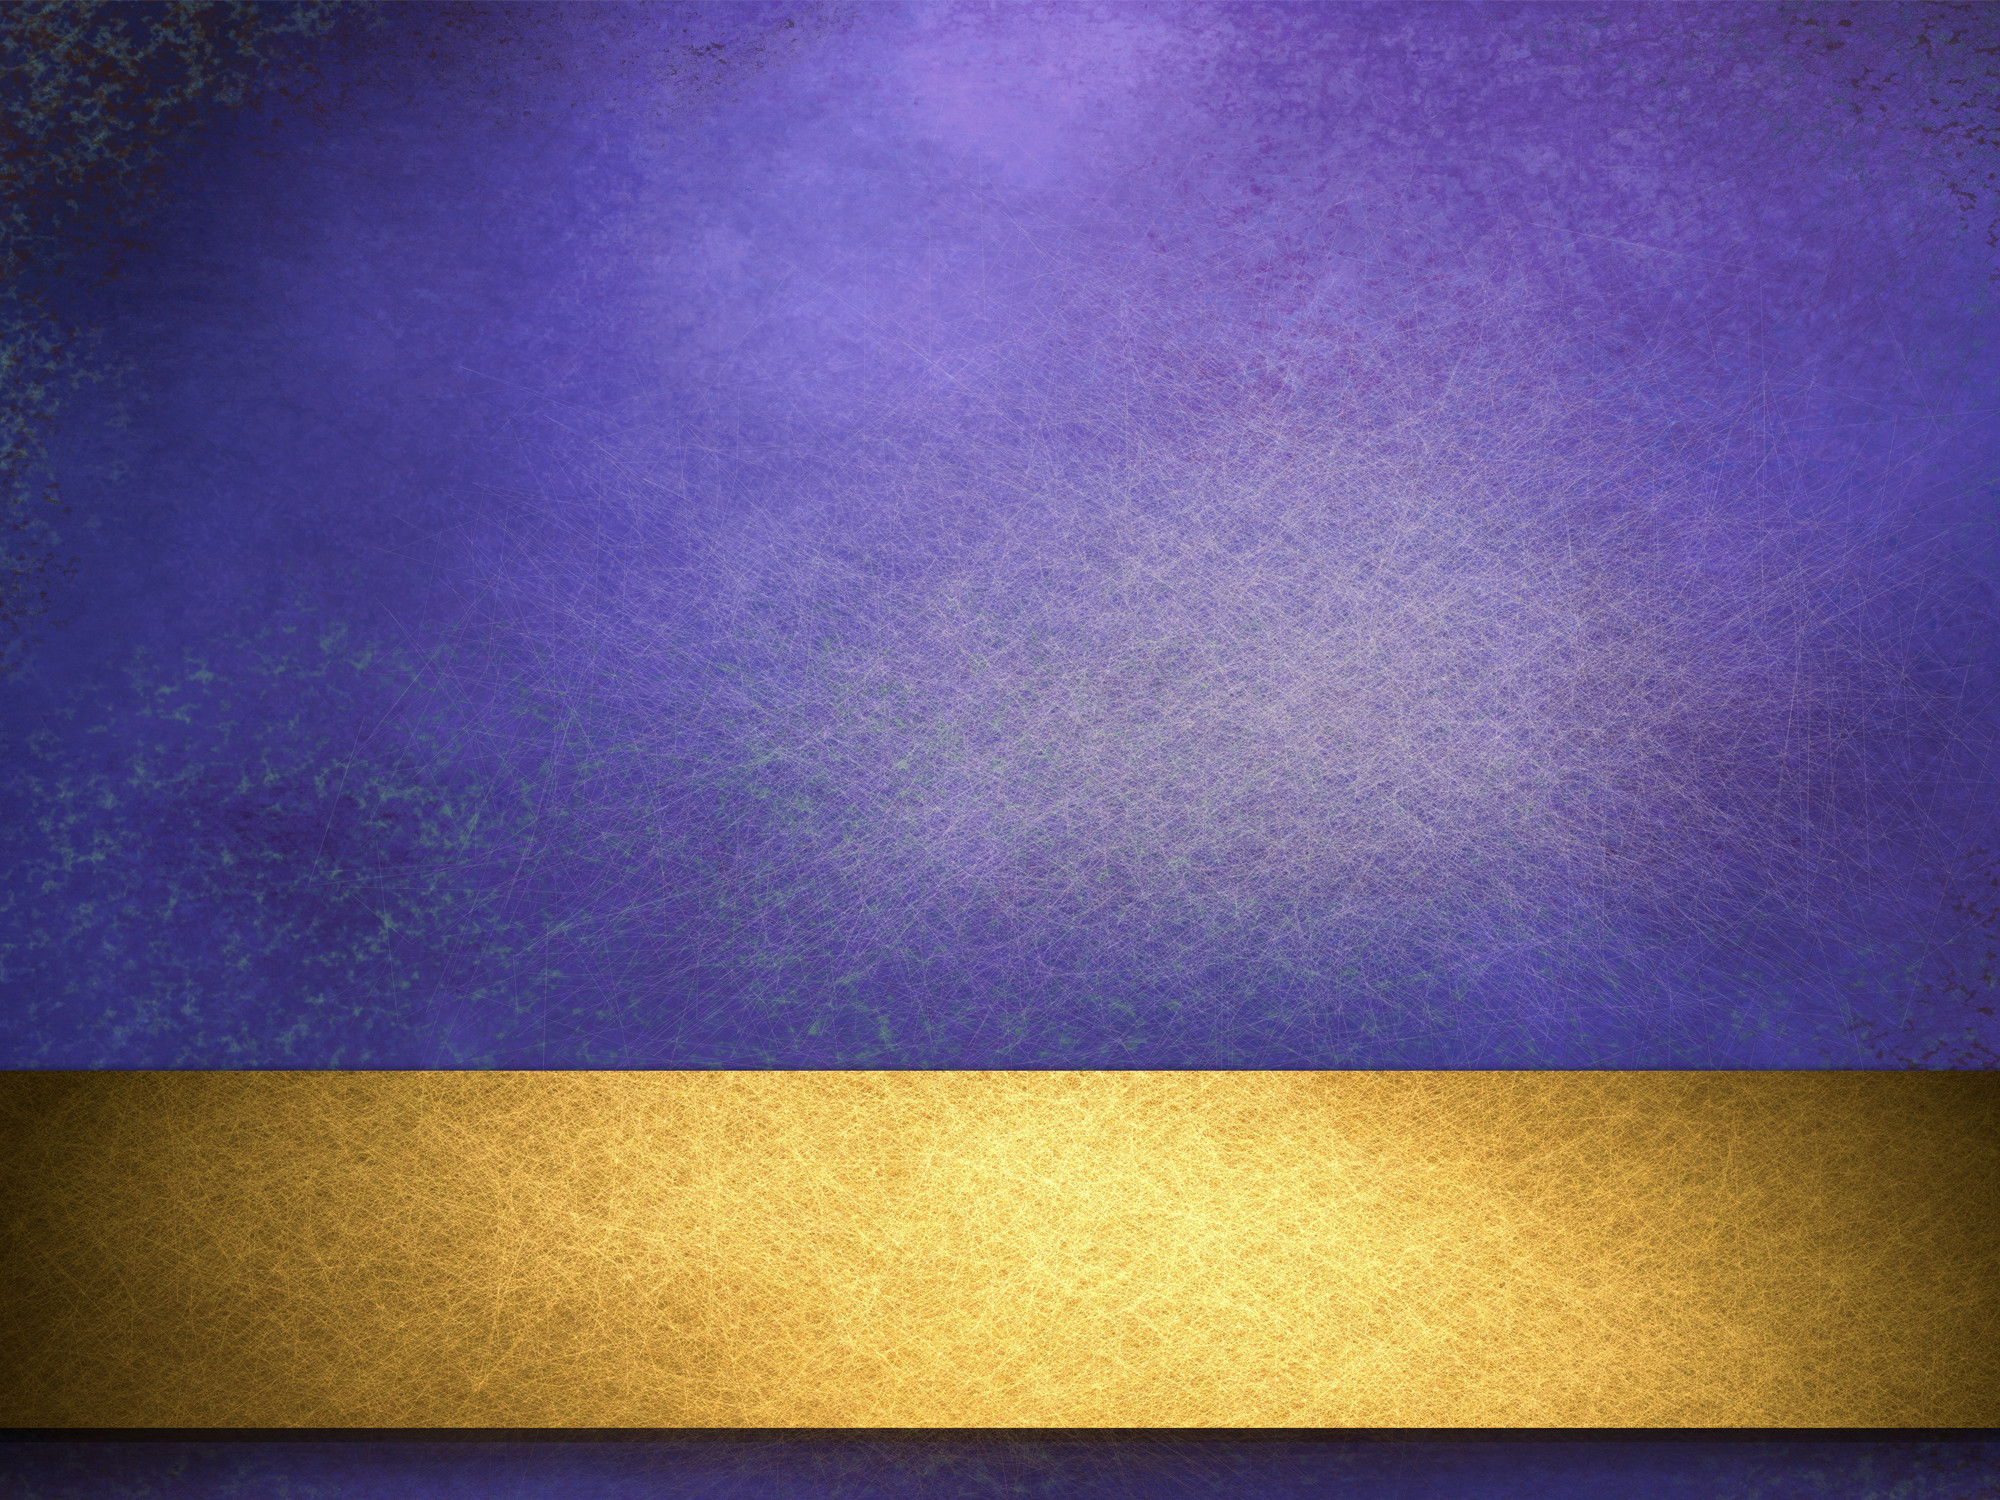 Blue and Gold Backgrounds